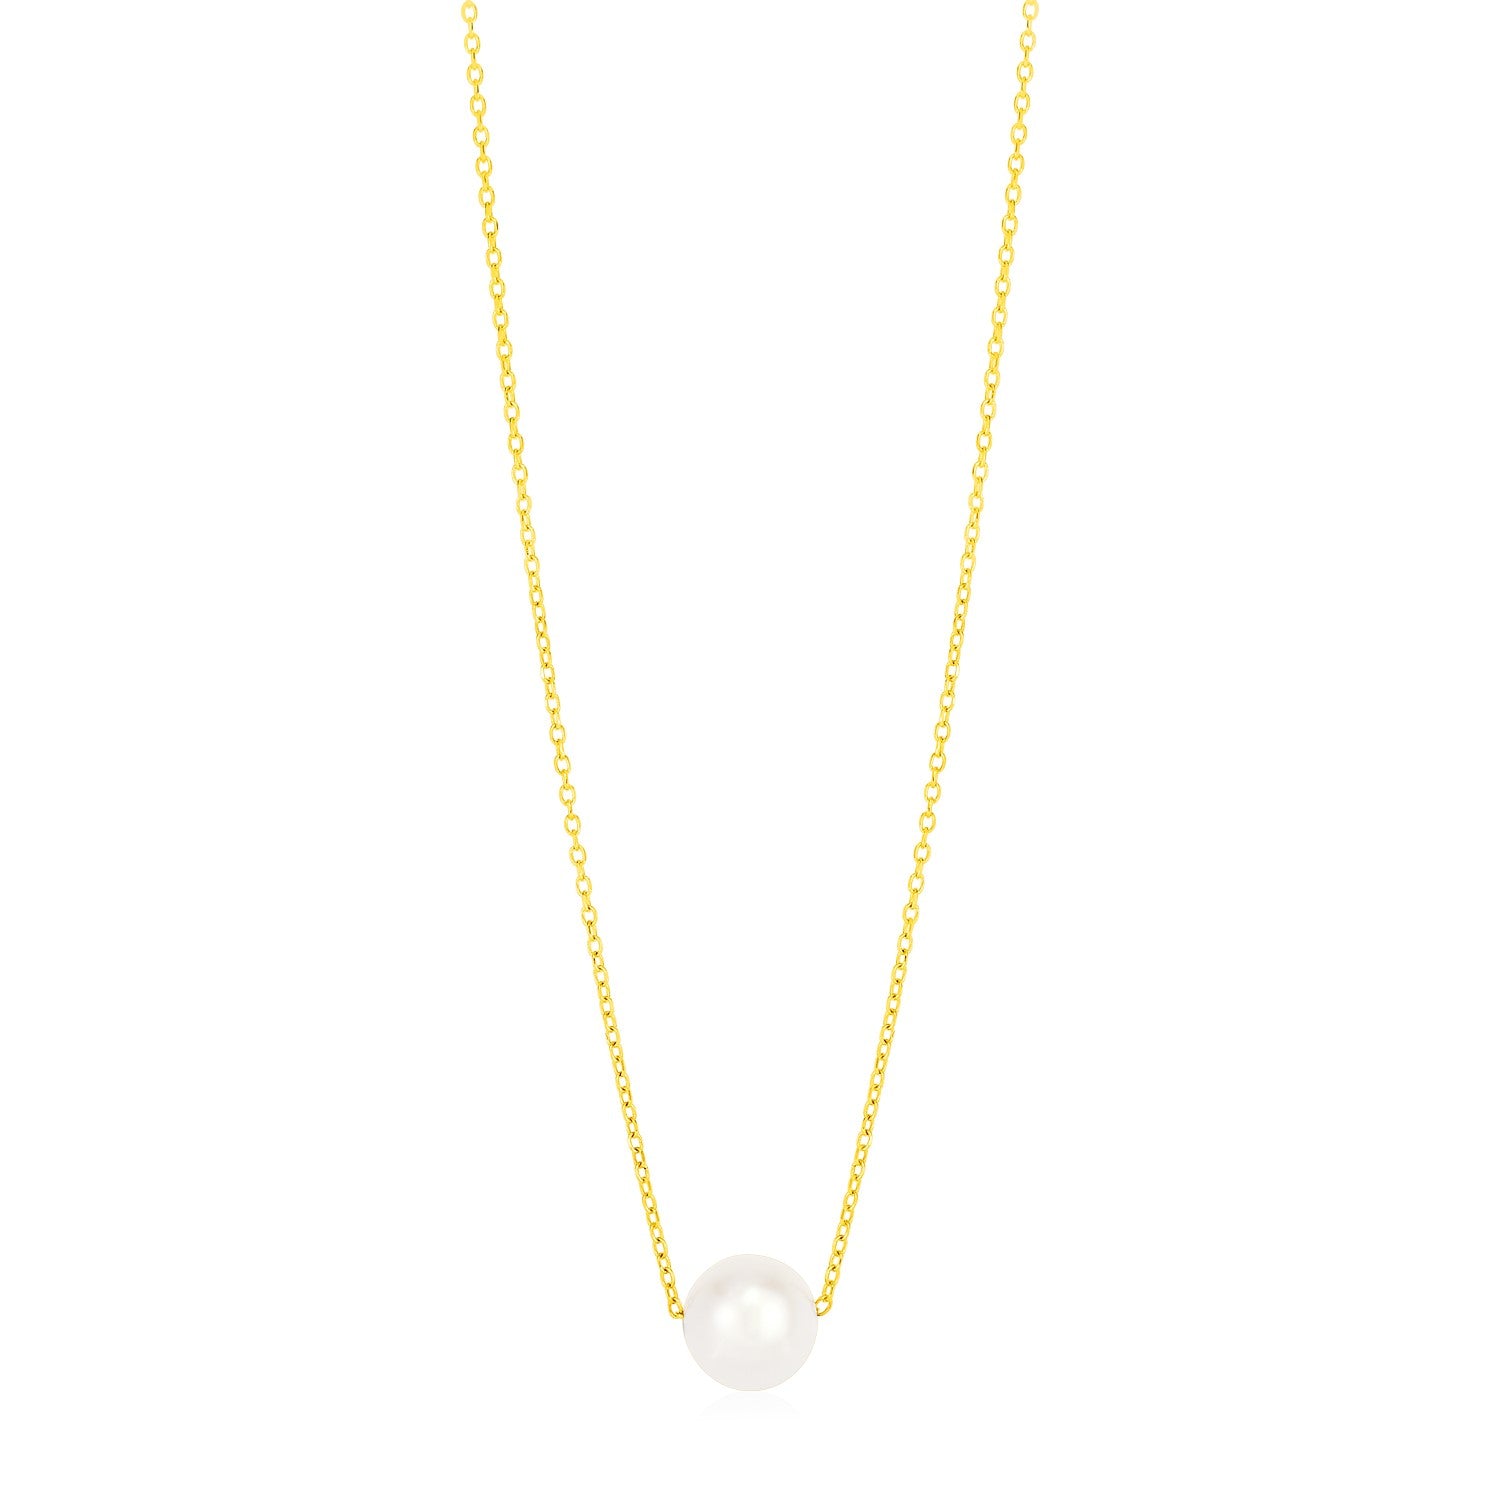 Solitaire Pearl Necklace.Our selection ranges from Engagement rings, wedding rings, earrings, necklaces, bracelets to anklets and rings in white gold, rose gold and classic gold.